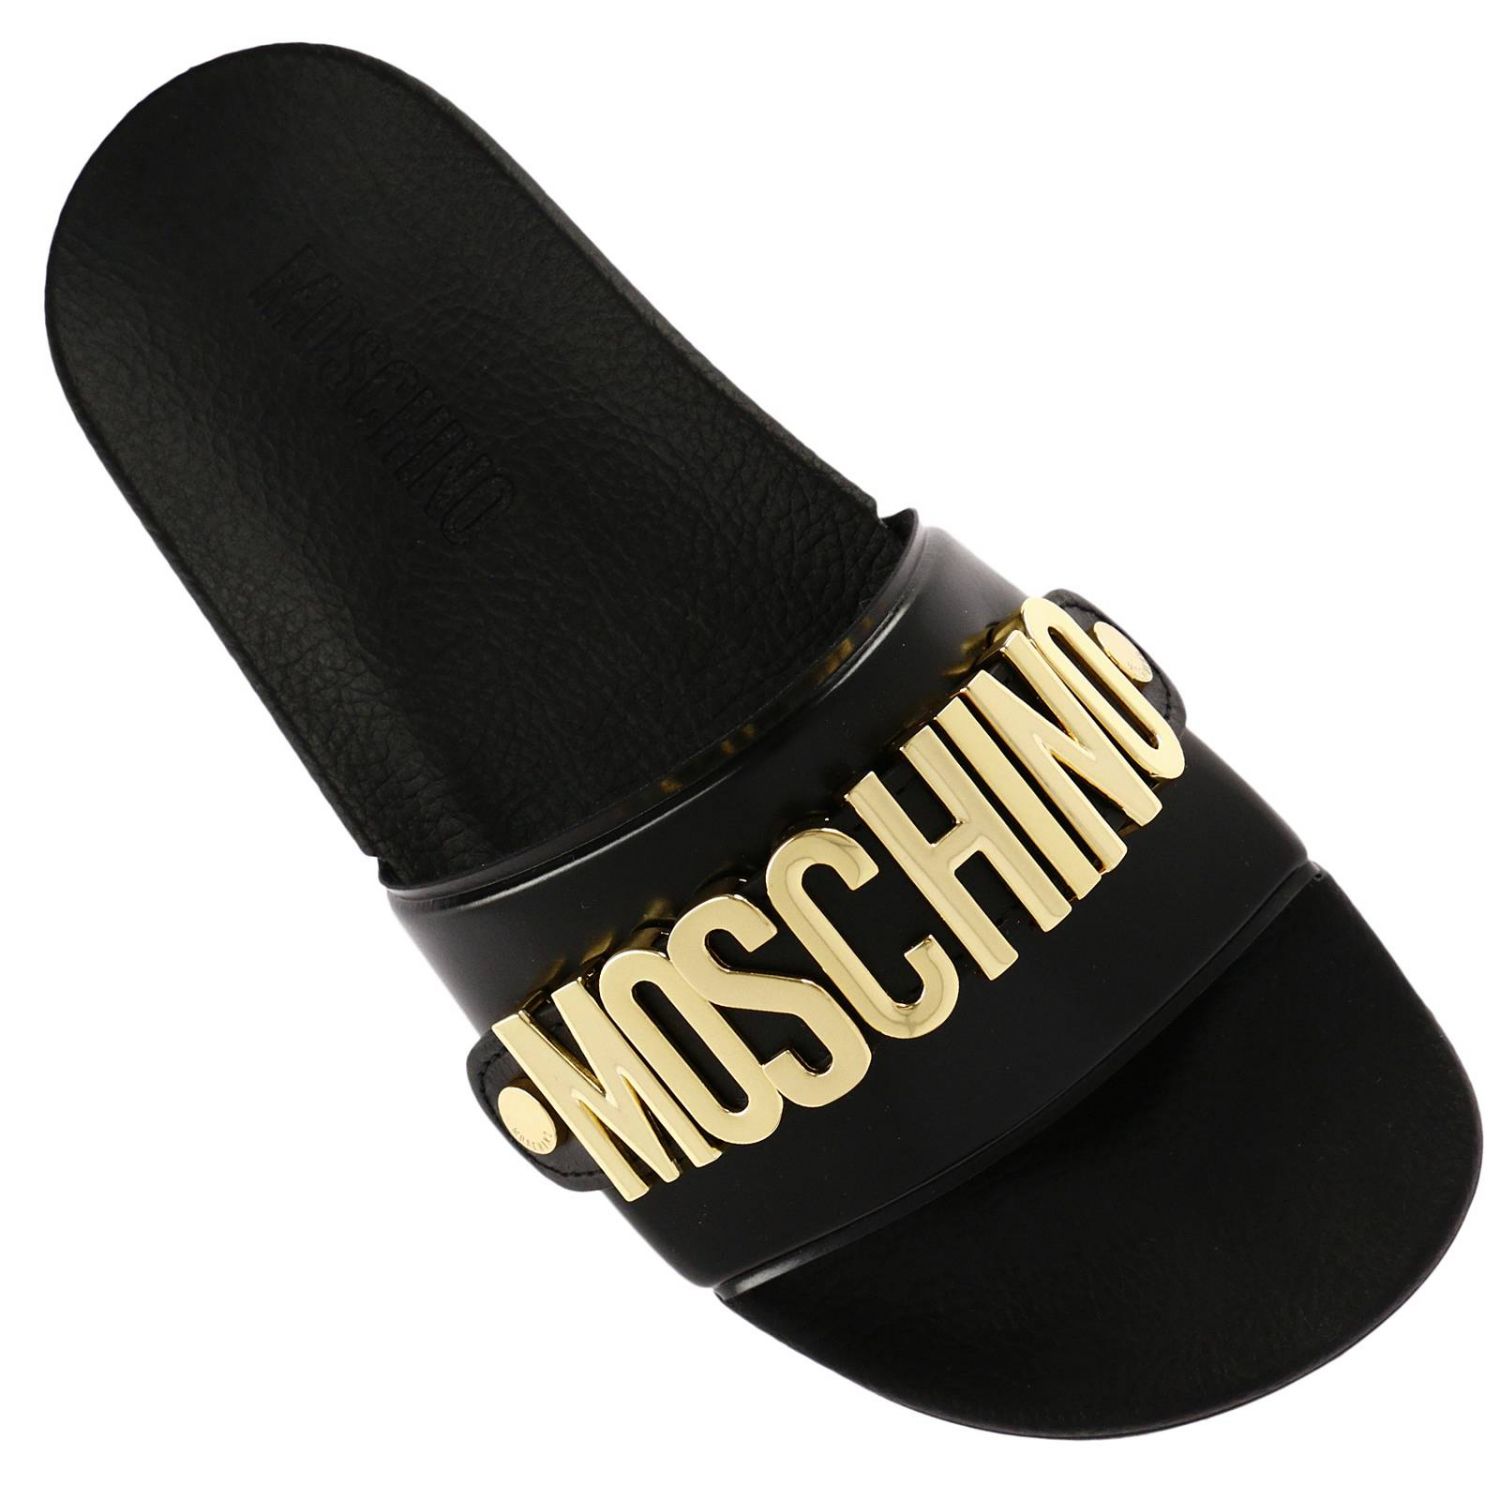 Moschino Couture Outlet: Moschino slides low sandal in PVC and wide ...